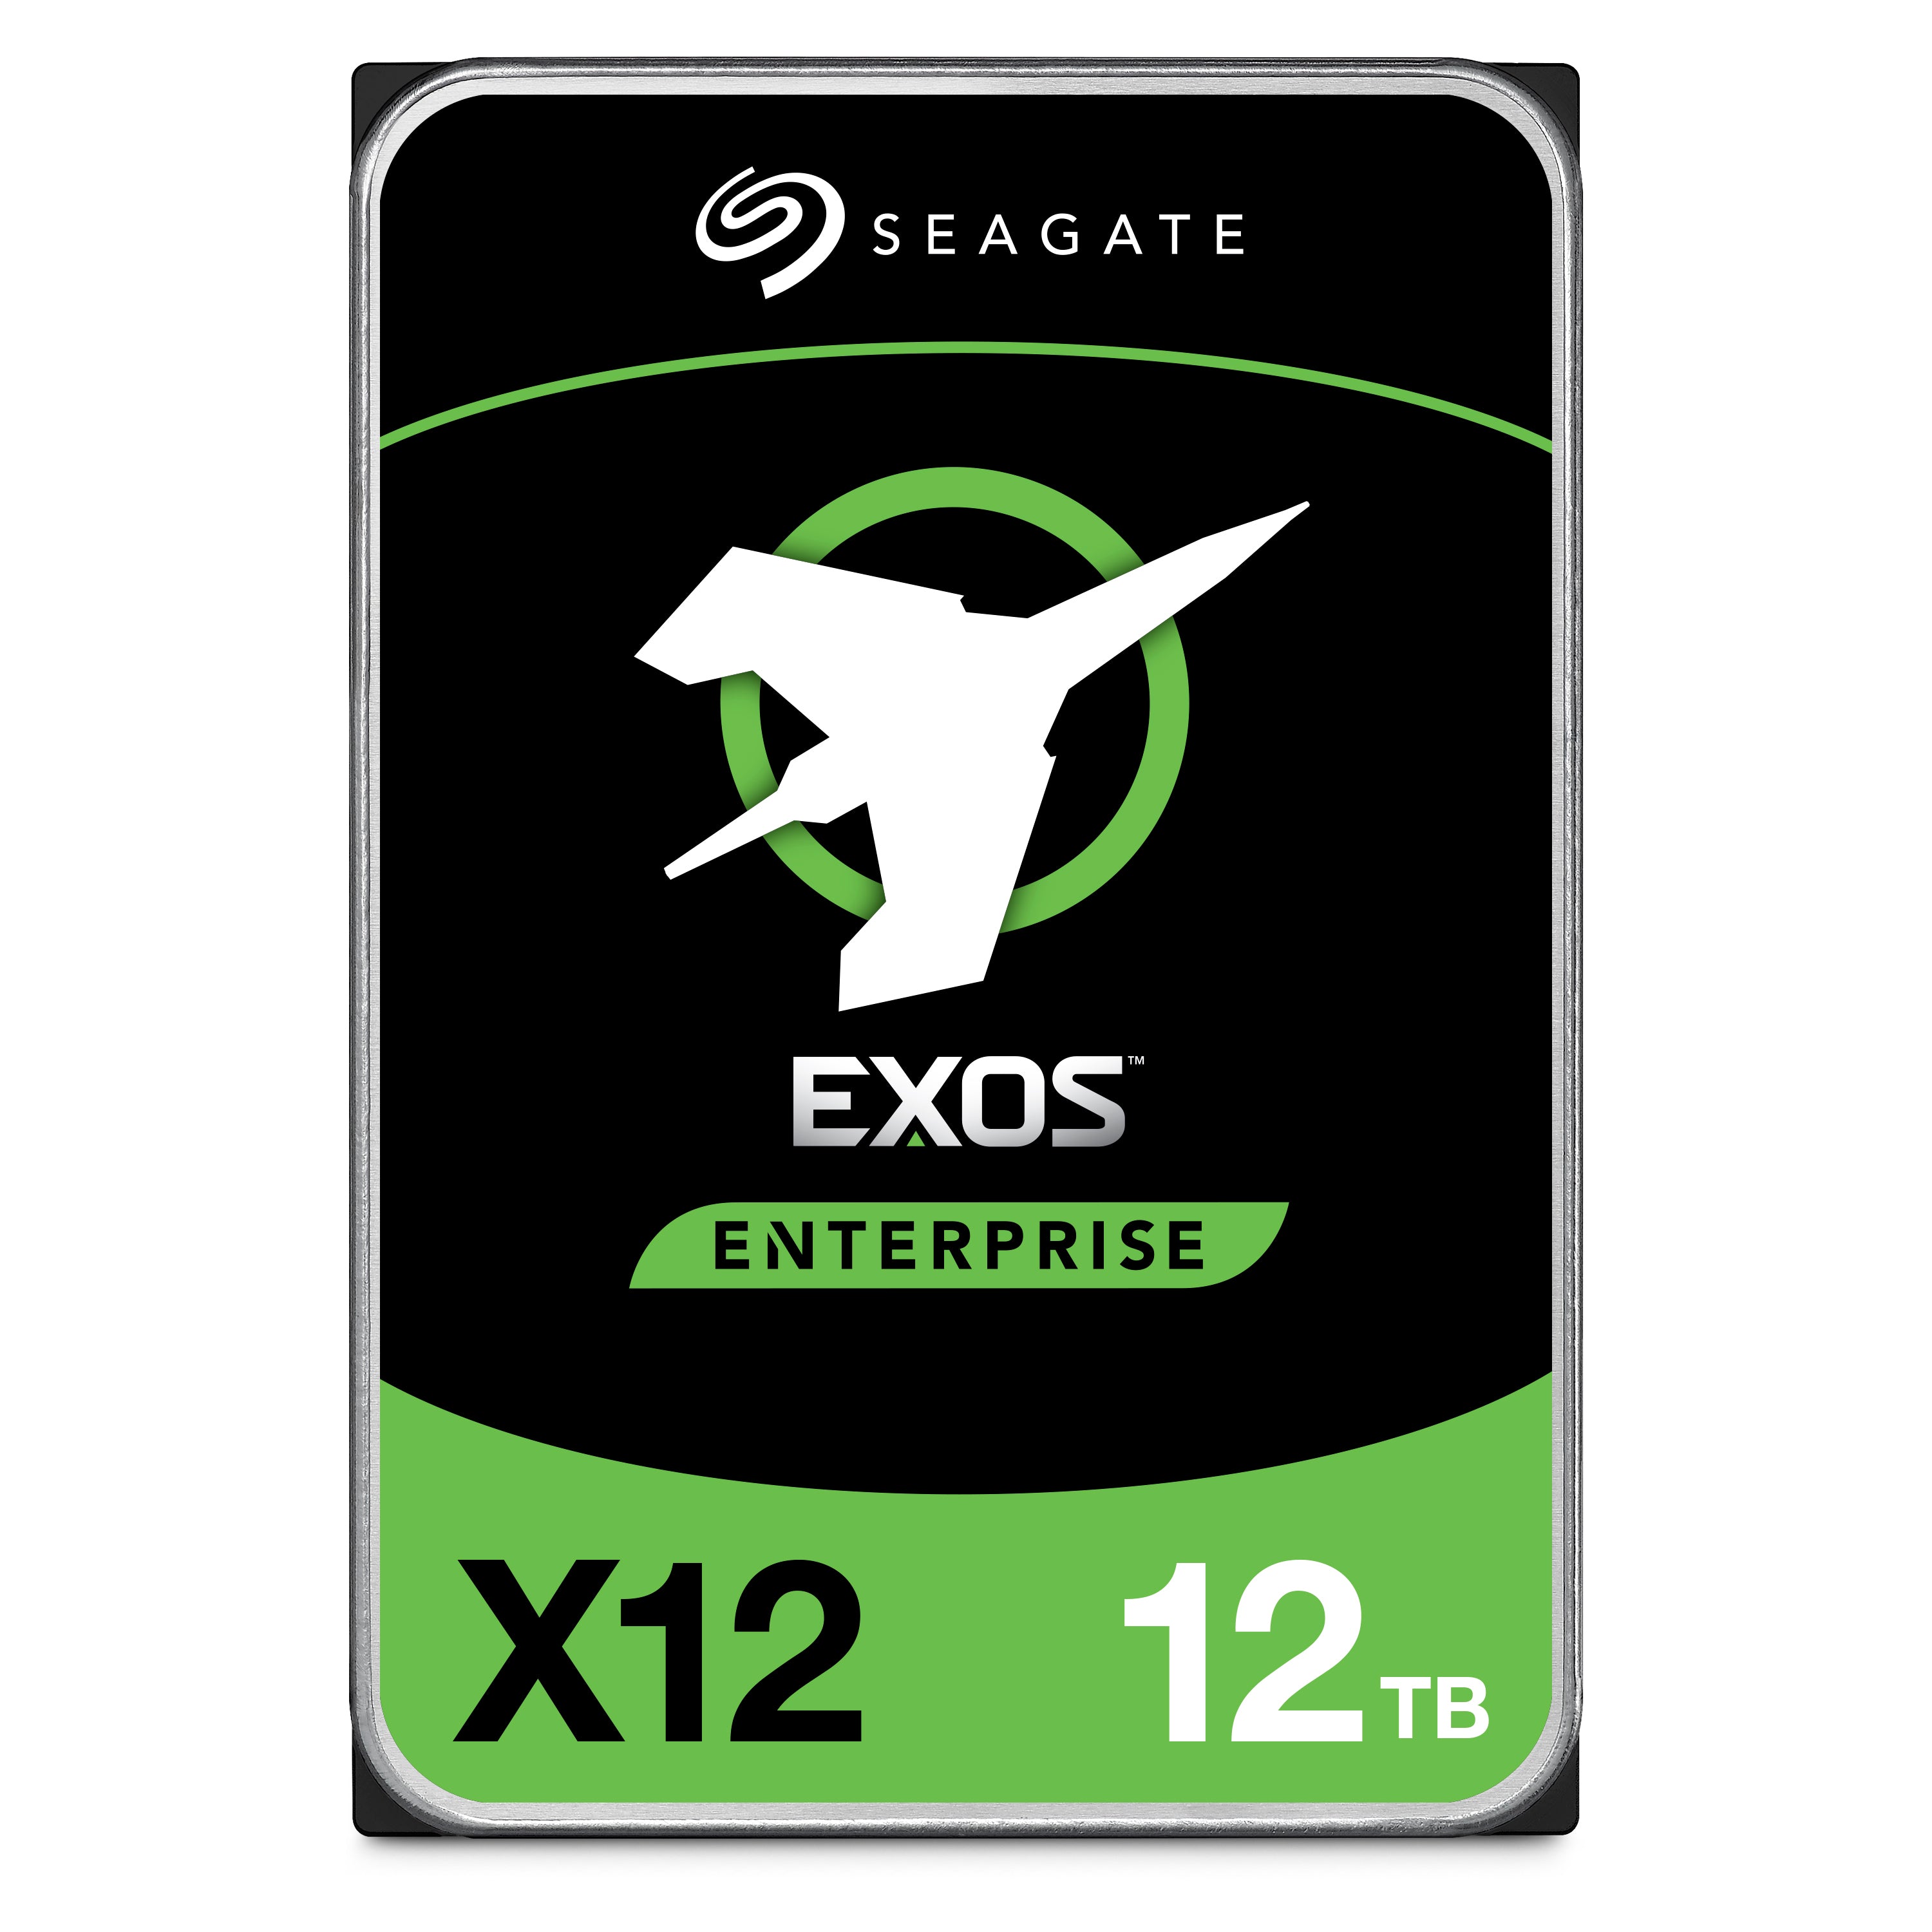 Seagate Exos X12 ST12000NM0007 12TB 7.2K RPM SATA 6Gb/s 512e 256MB 3.5" Manufacturer Recertified HDD